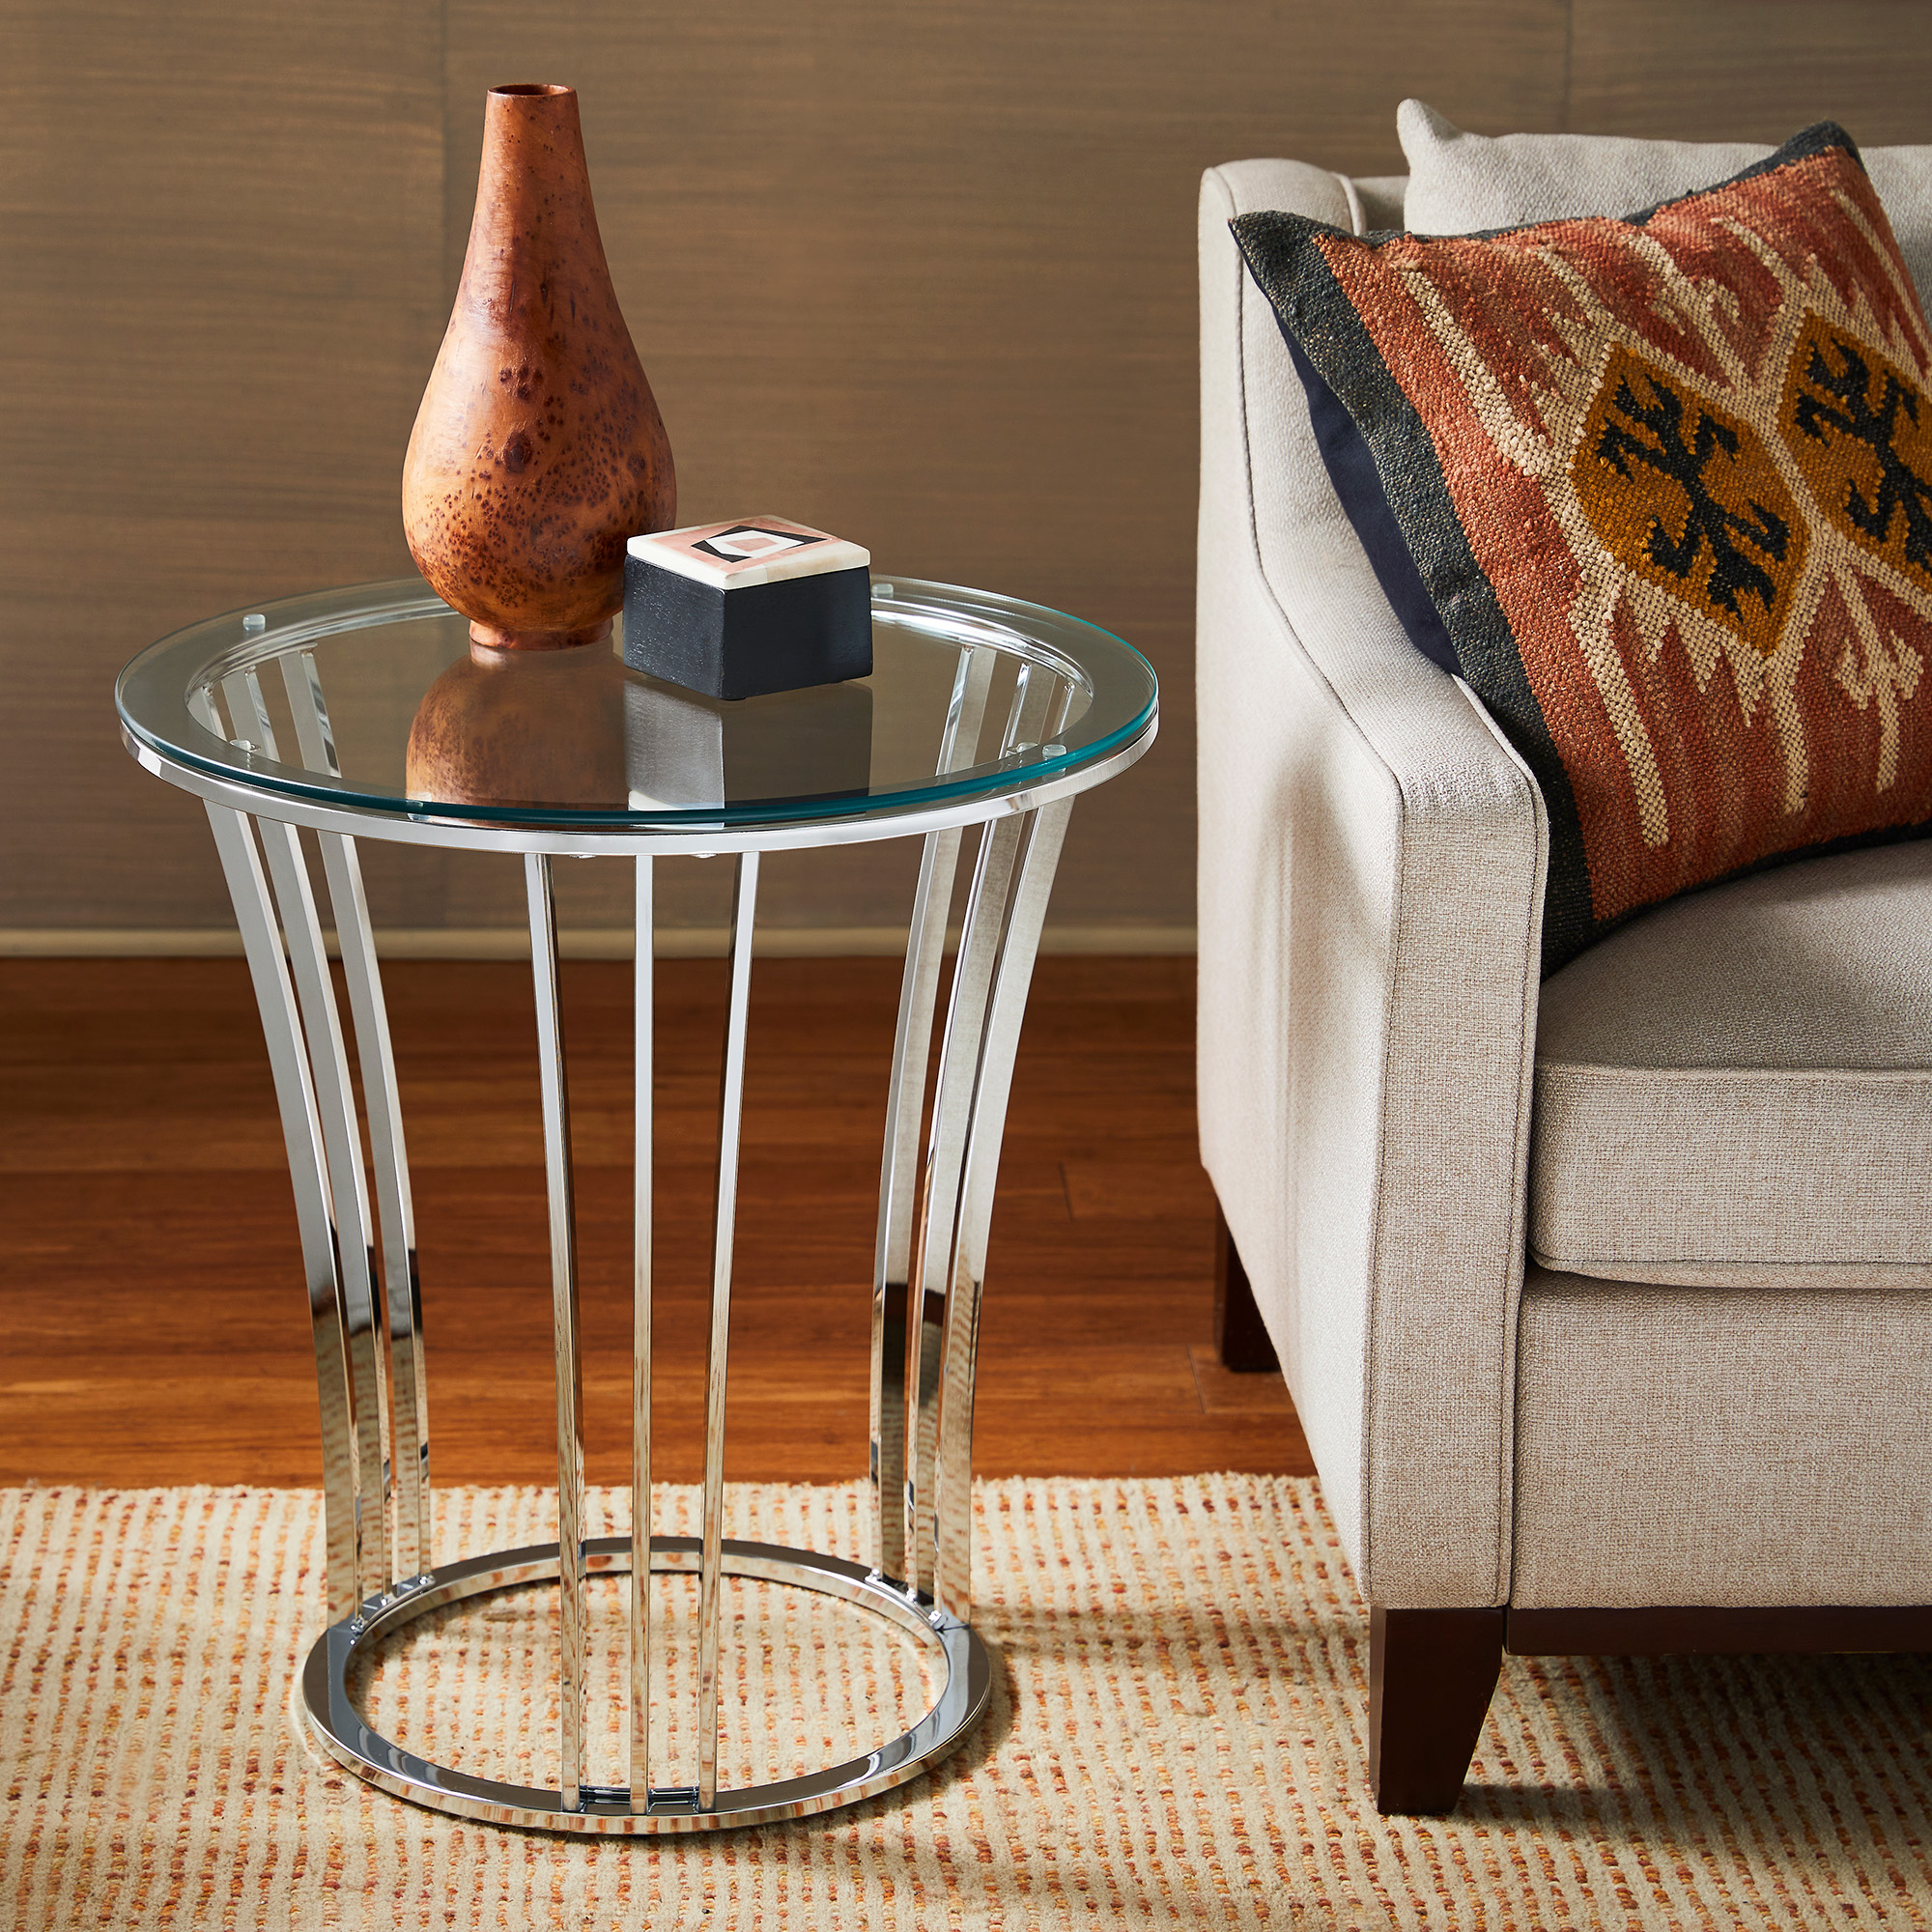  Chrome Finish Table with Glass Top